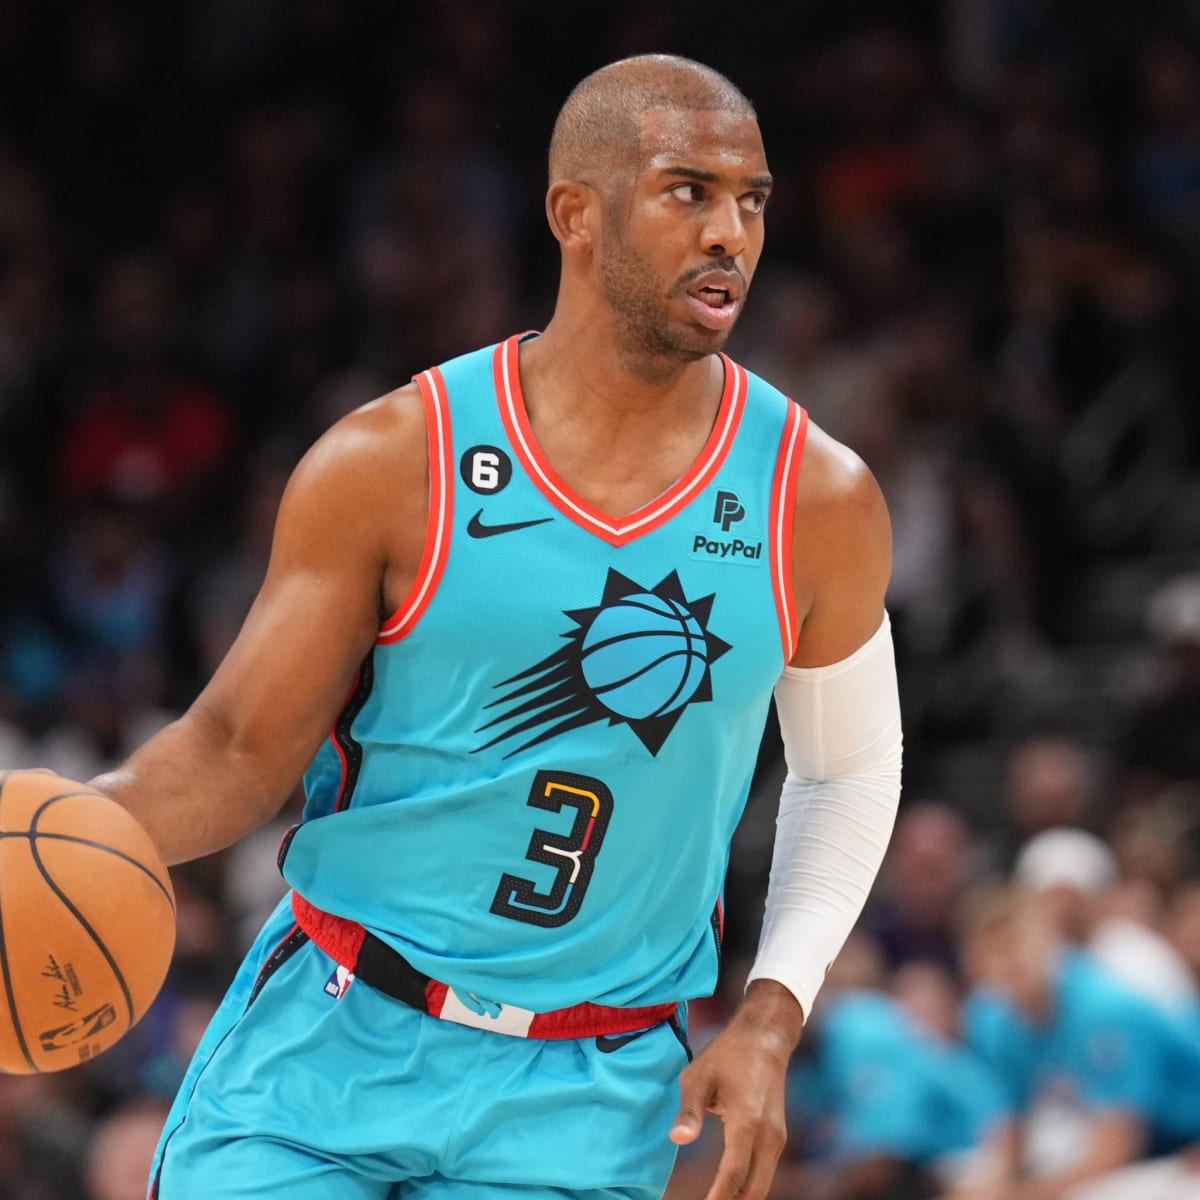 3 takeaways from Chris Paul's first game back from injury